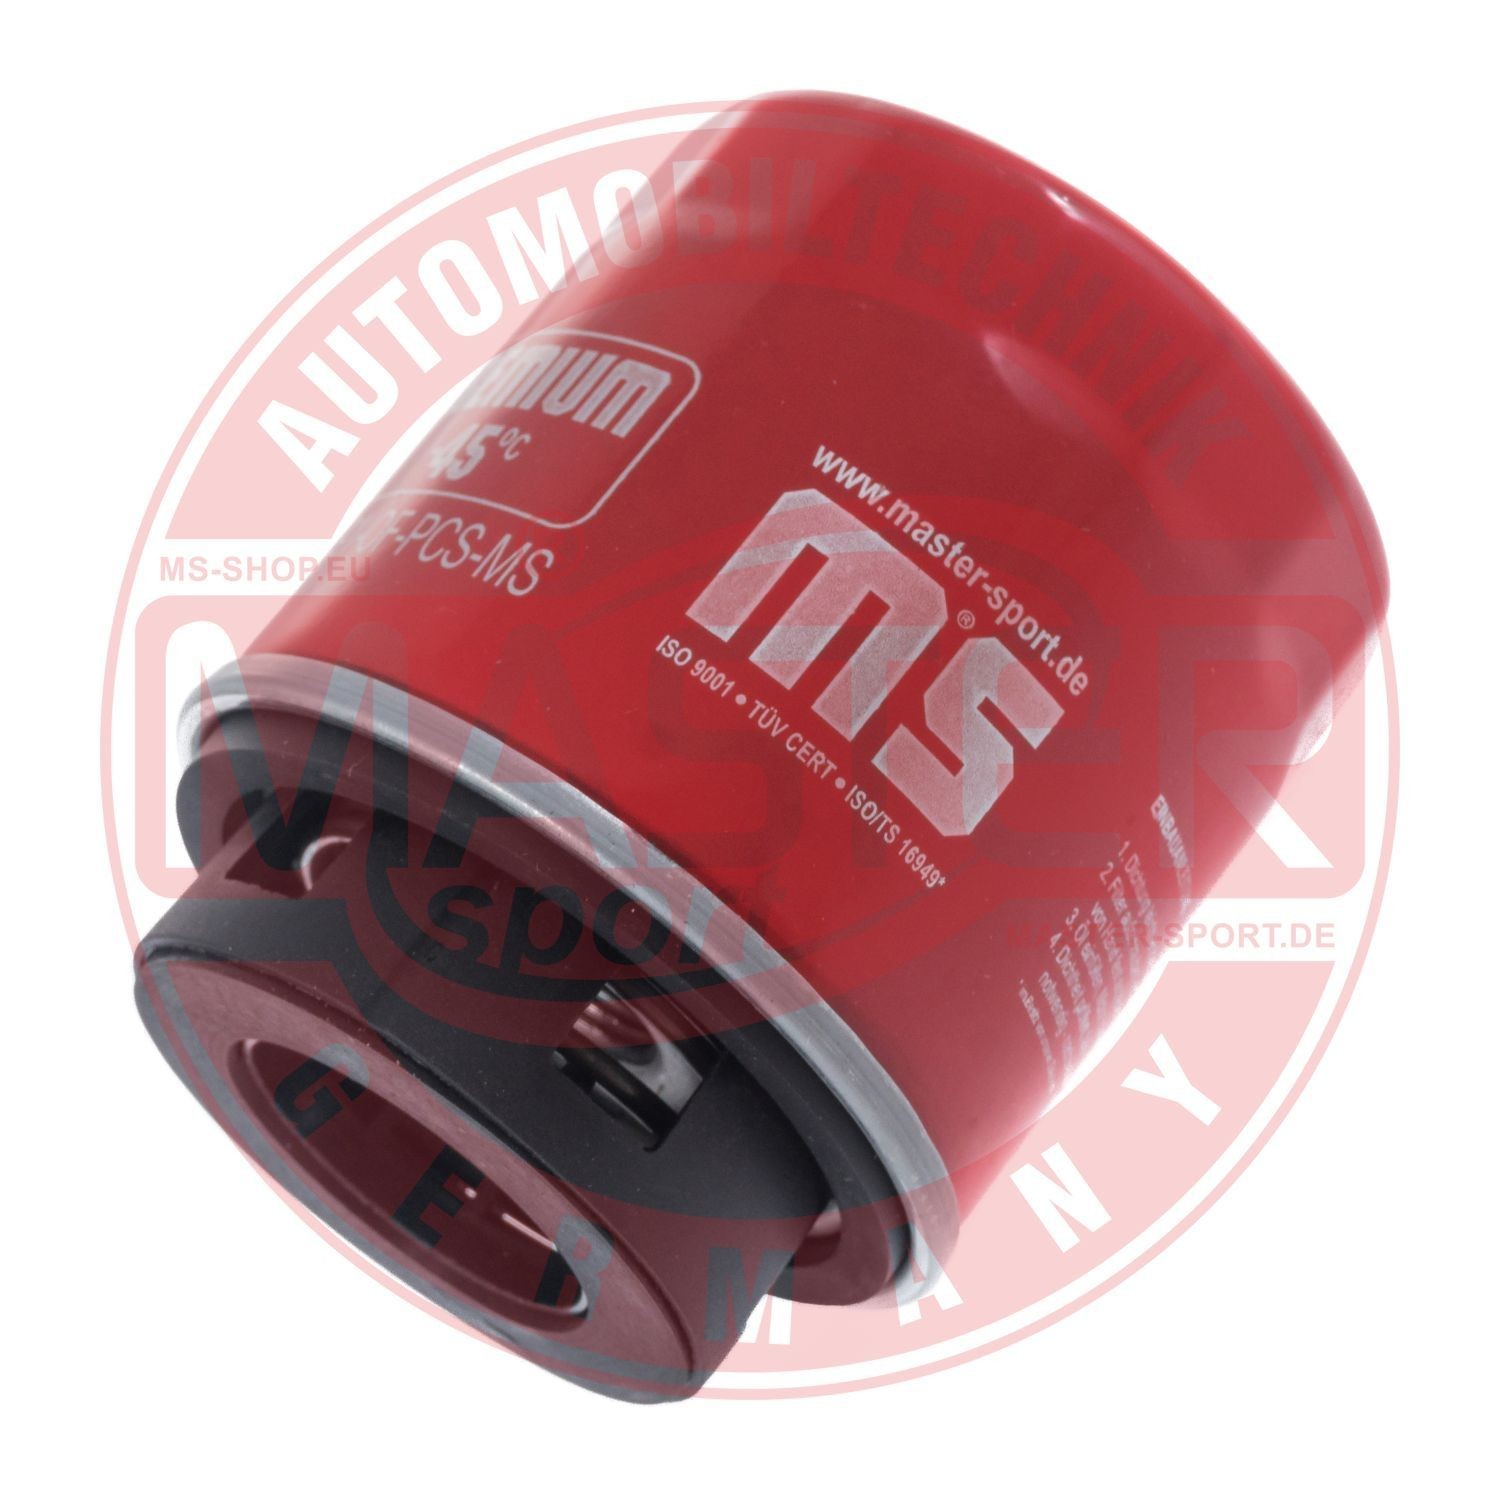 MASTER-SPORT 712/91-OF-PCS-MS Oil filter AUDI experience and price